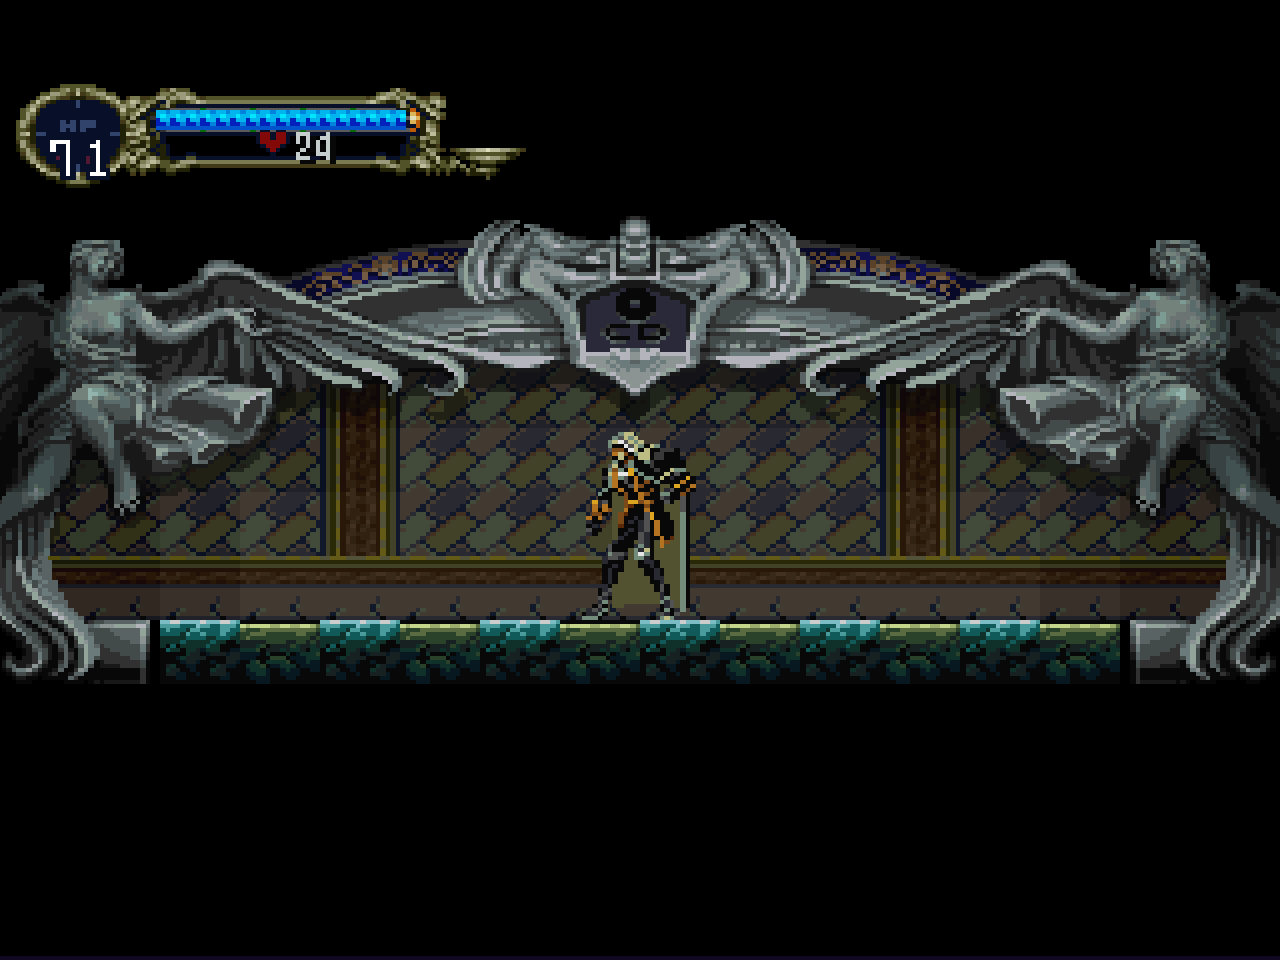 download symphony of the night megadrive